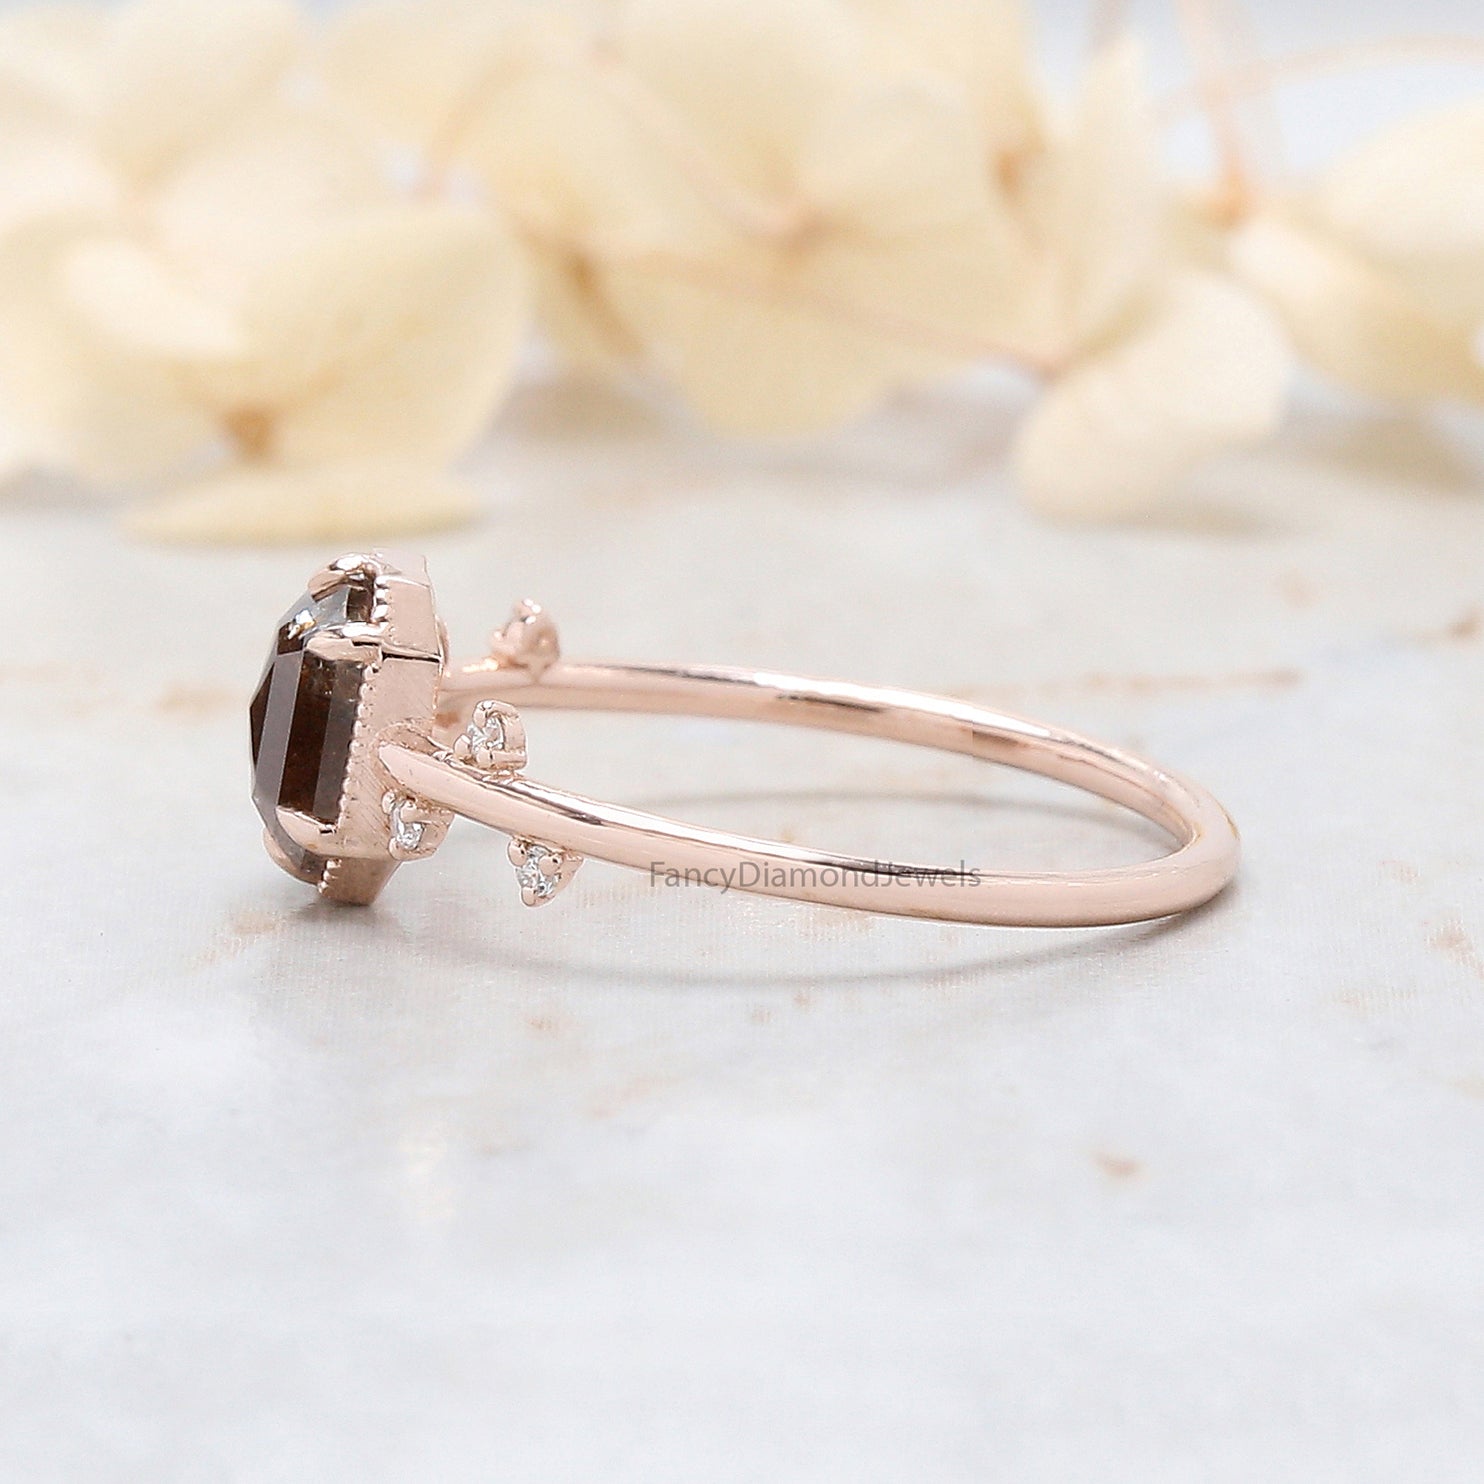 Emerald Cut Brown Color Diamond Ring 0.79 Ct 6.18 MM Emerald Shape Diamond Ring 14K Rose Gold Silver Engagement Ring Gift For Her QL652